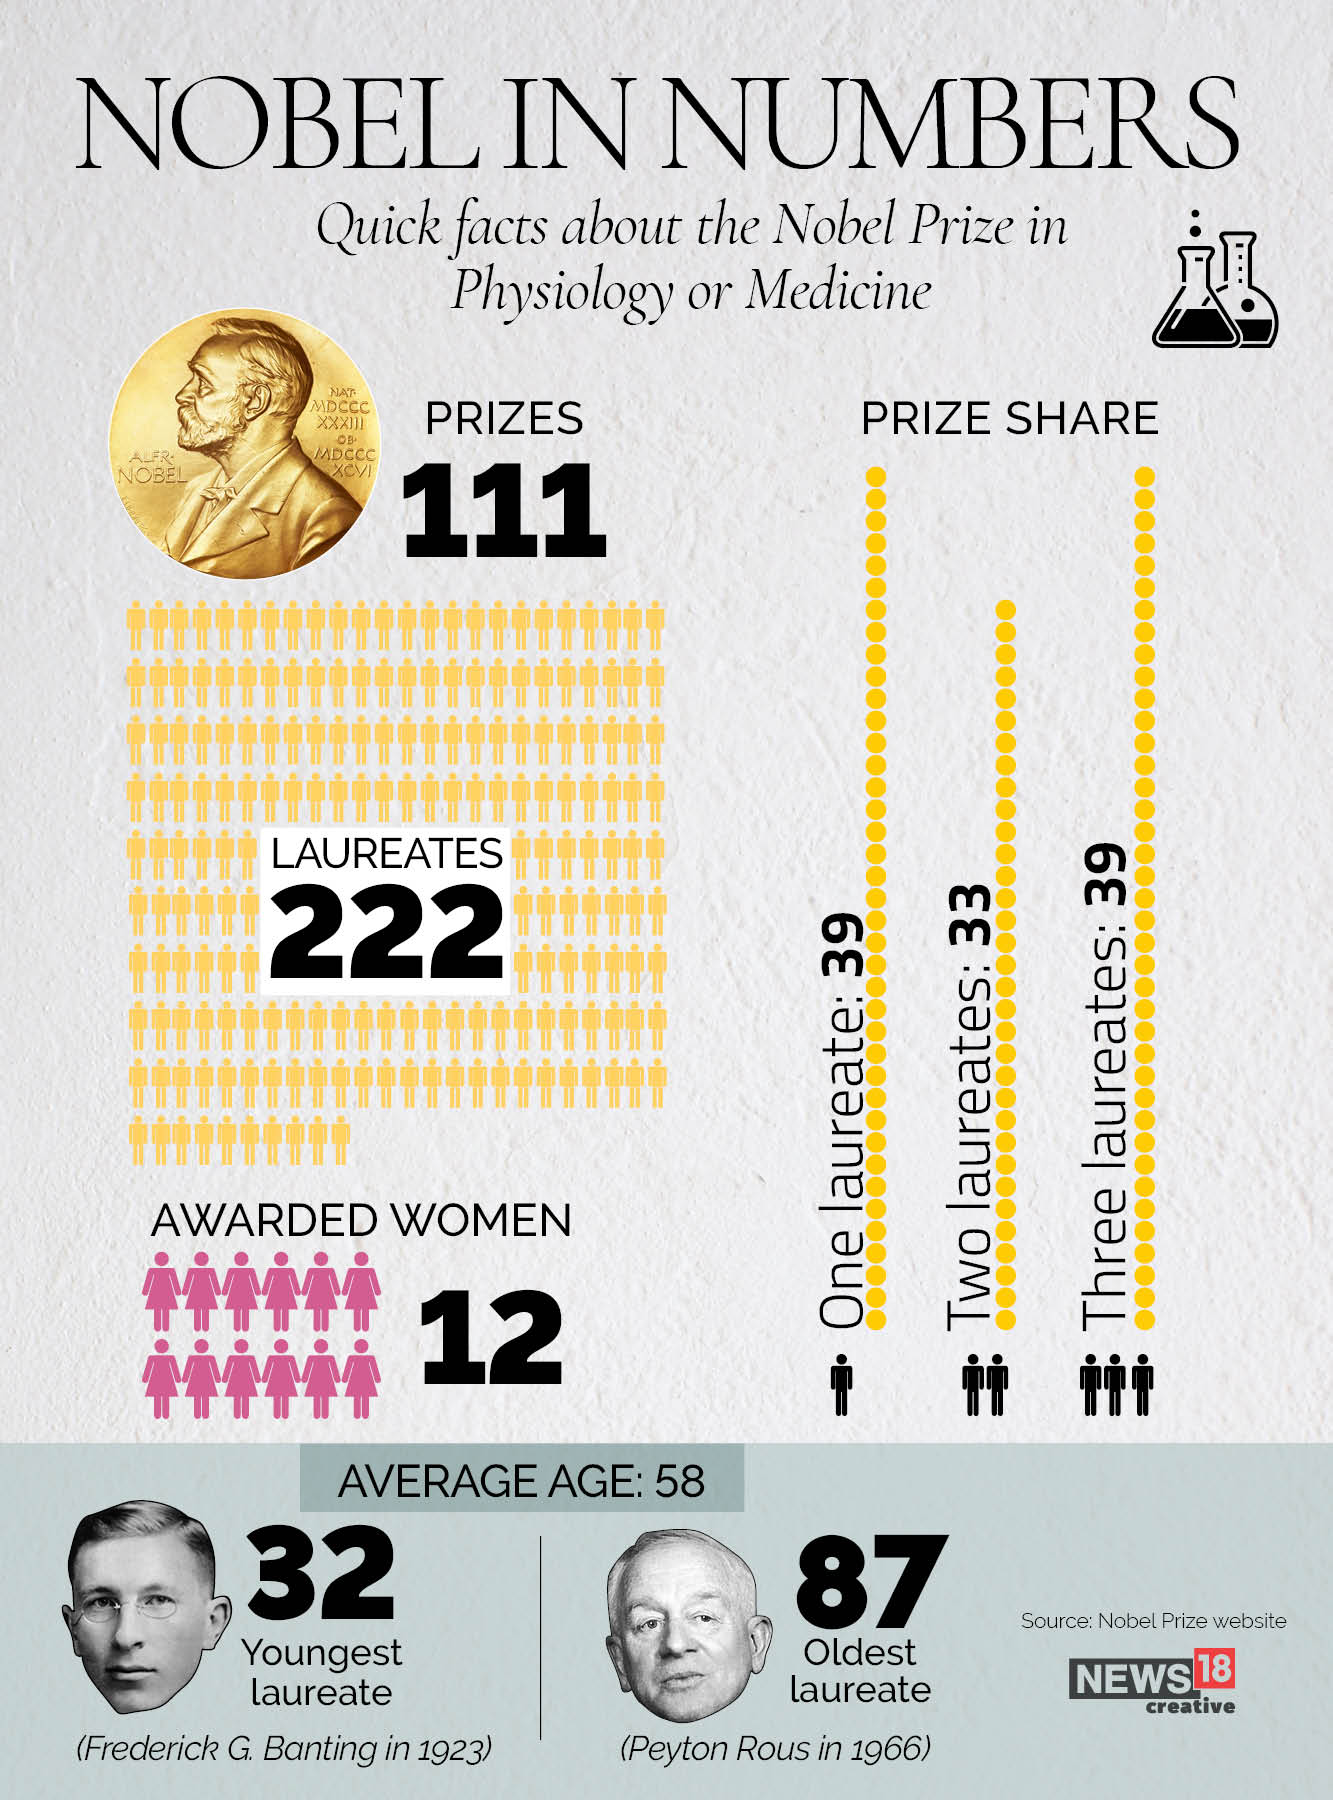 Infographic: Quick facts about Nobel Prize in medicine and physiology